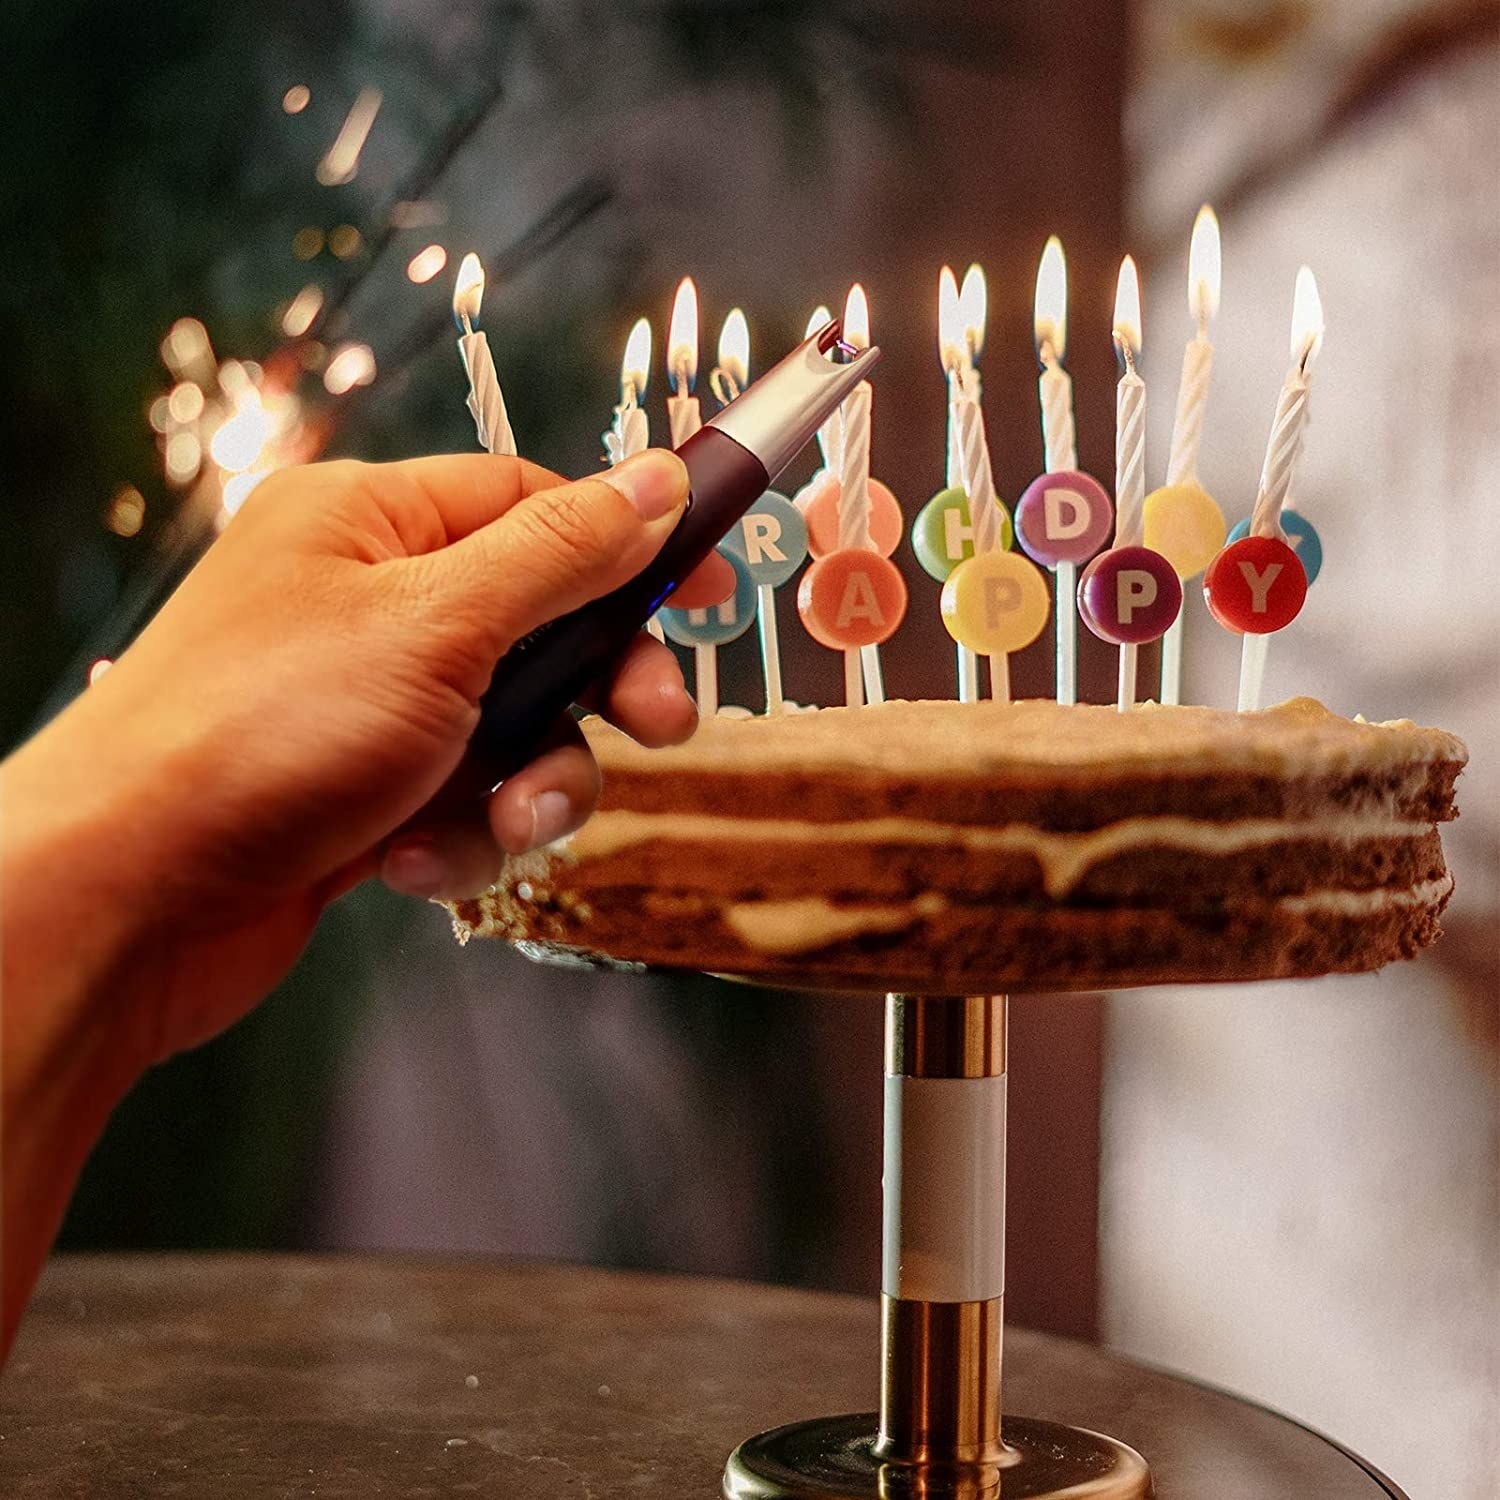 A person lighting birthday cake candles with the lighter